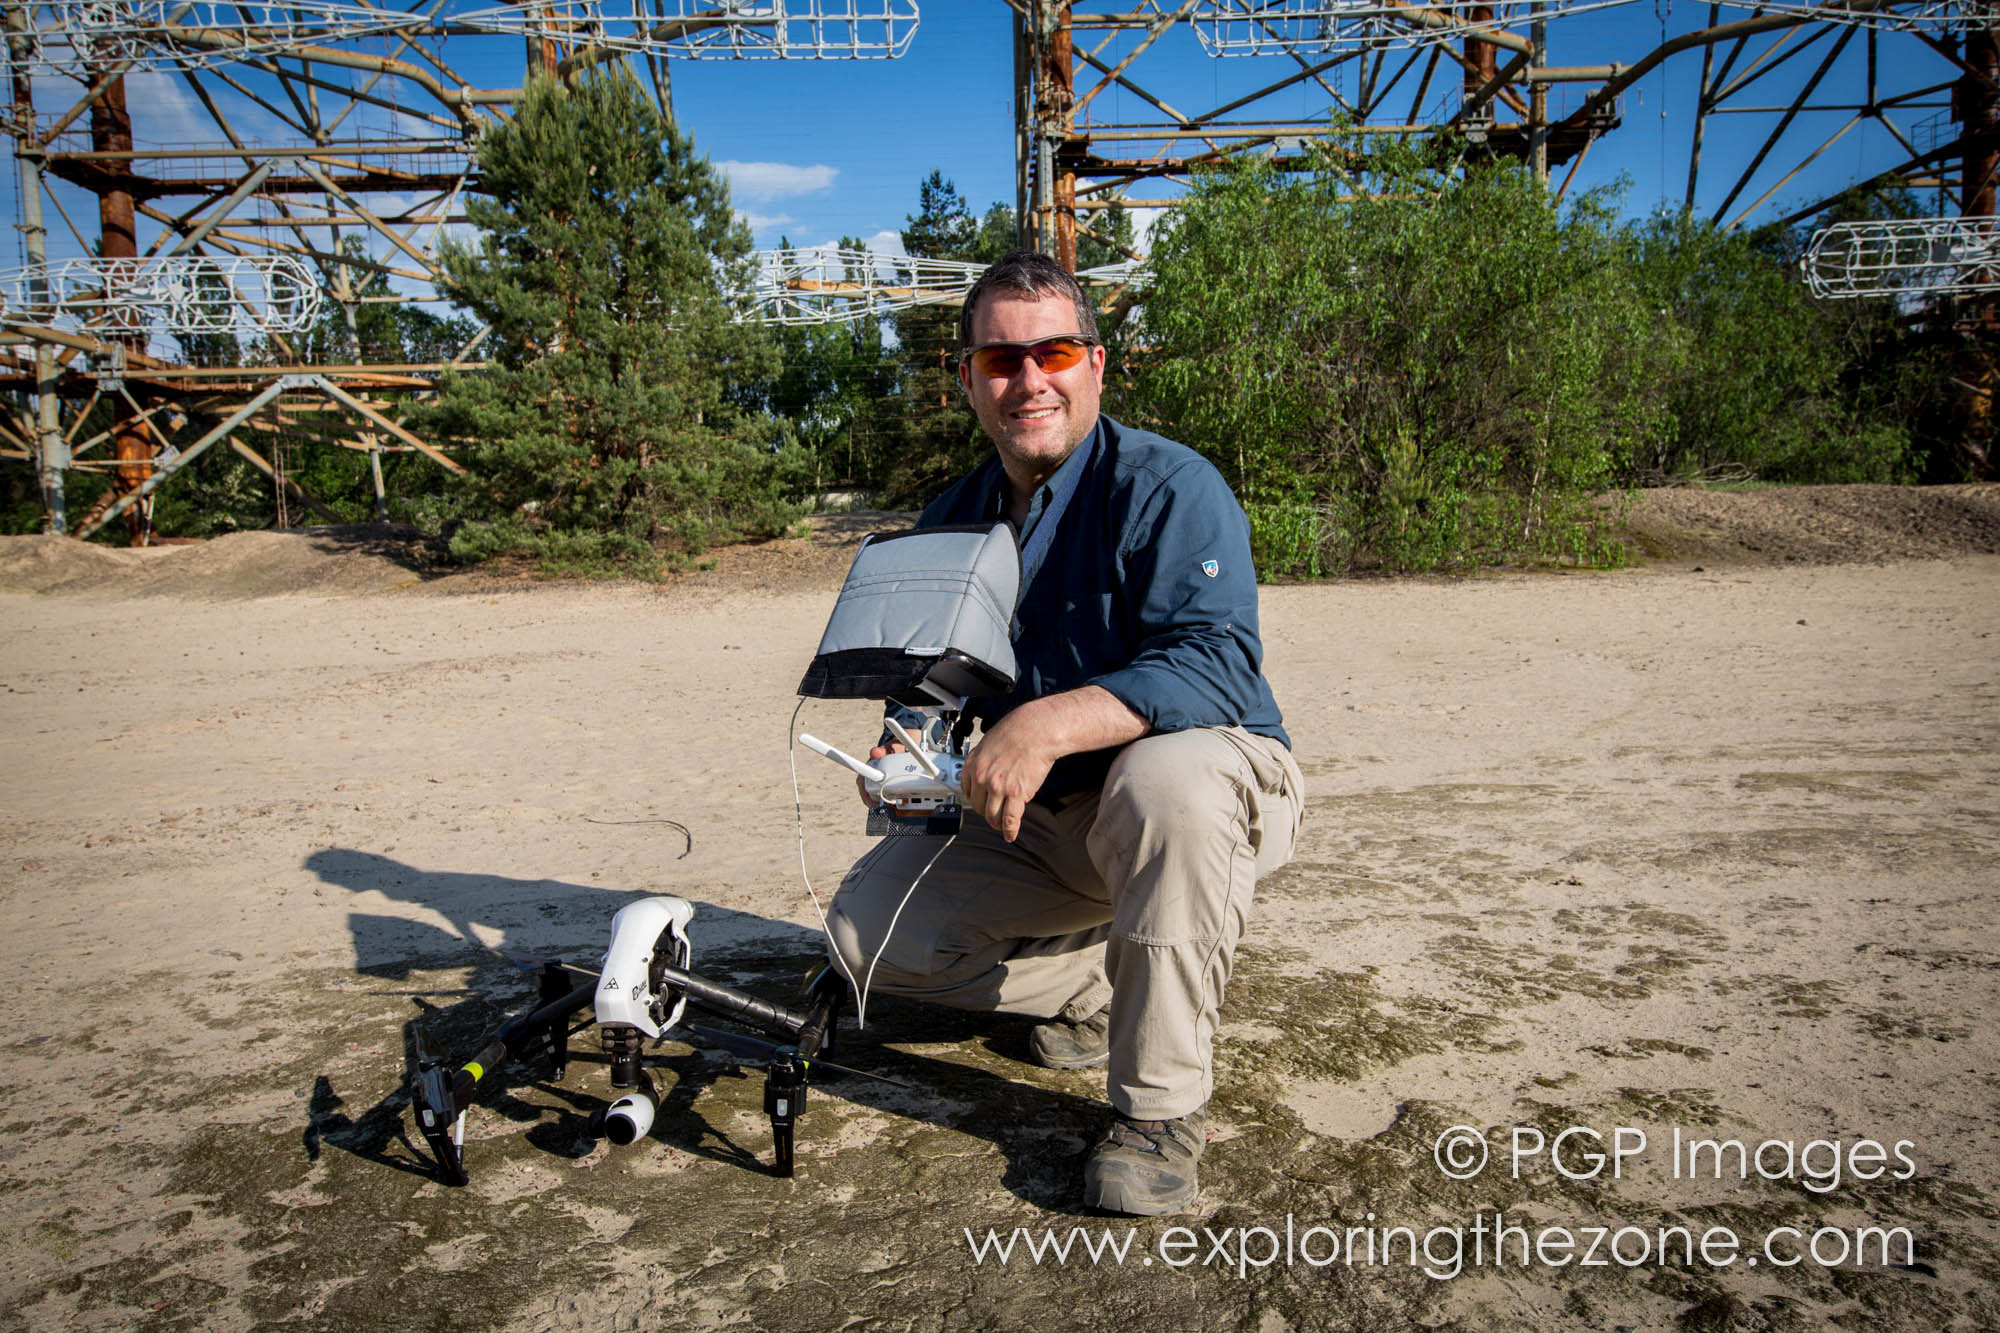 Review: Flying DJI's Inspire 1 in the Chernobyl Nuclear Exclusion